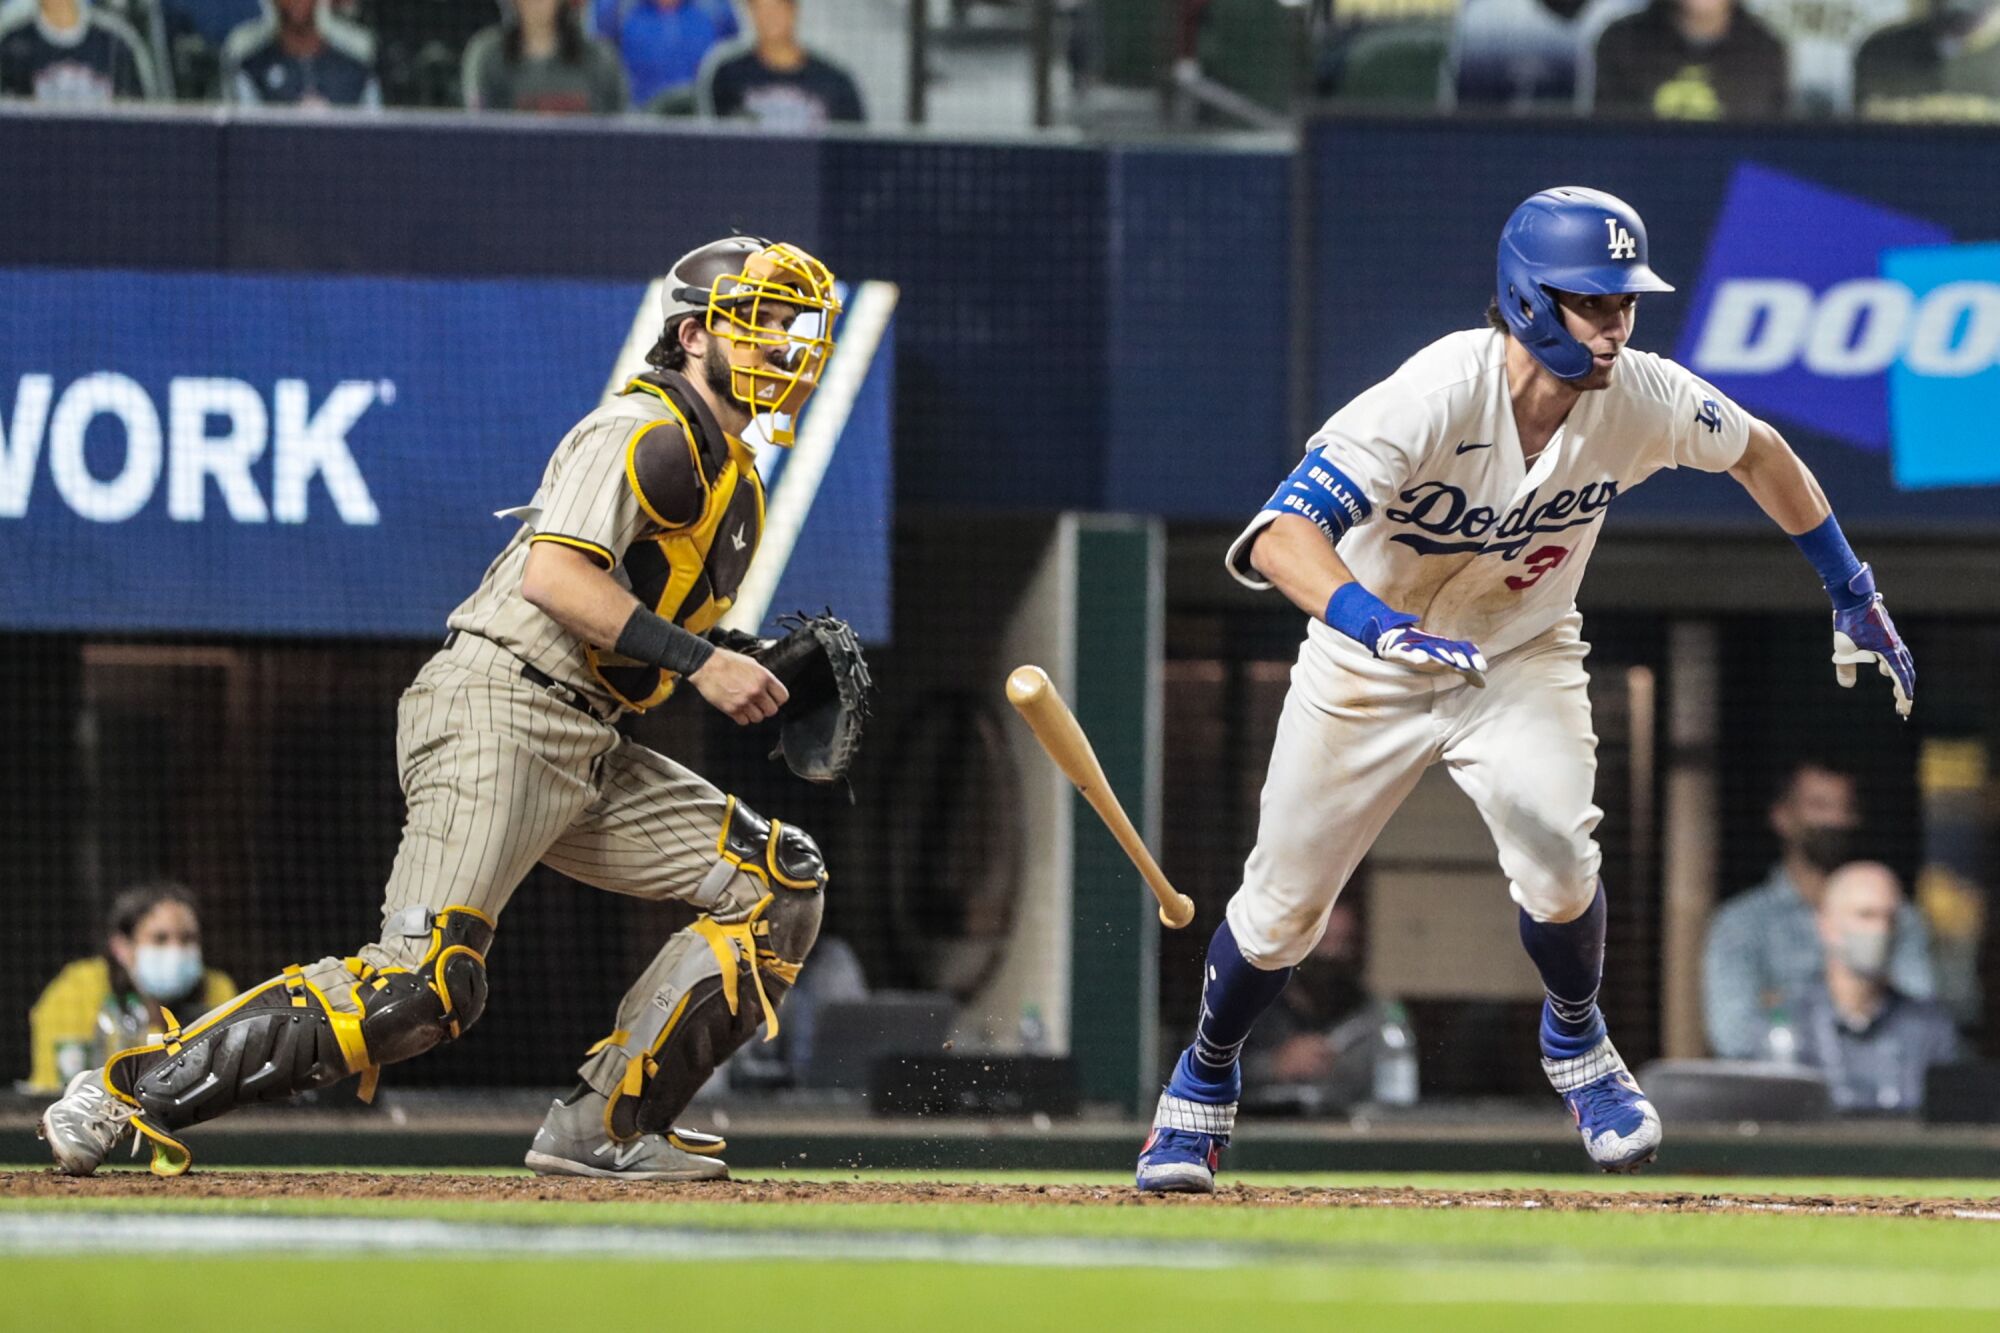 Dodgers center fielder Cody Bellinger reaches base on an error in the fifth inning.